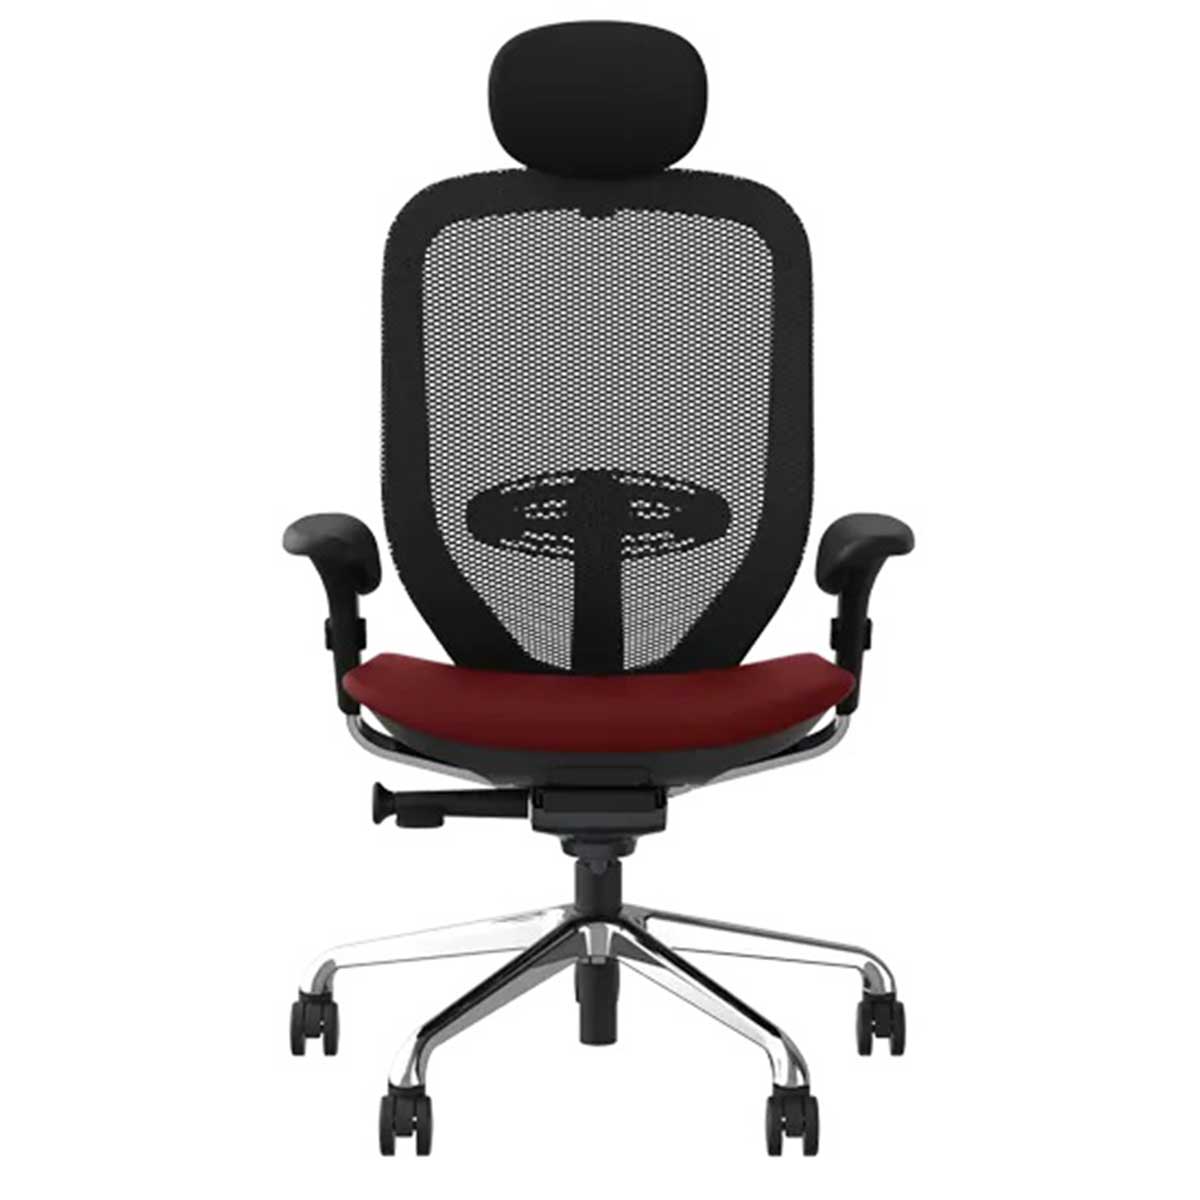 Ergonomic Chairs Manufacturers, Suppliers in Greater Kailash Iii